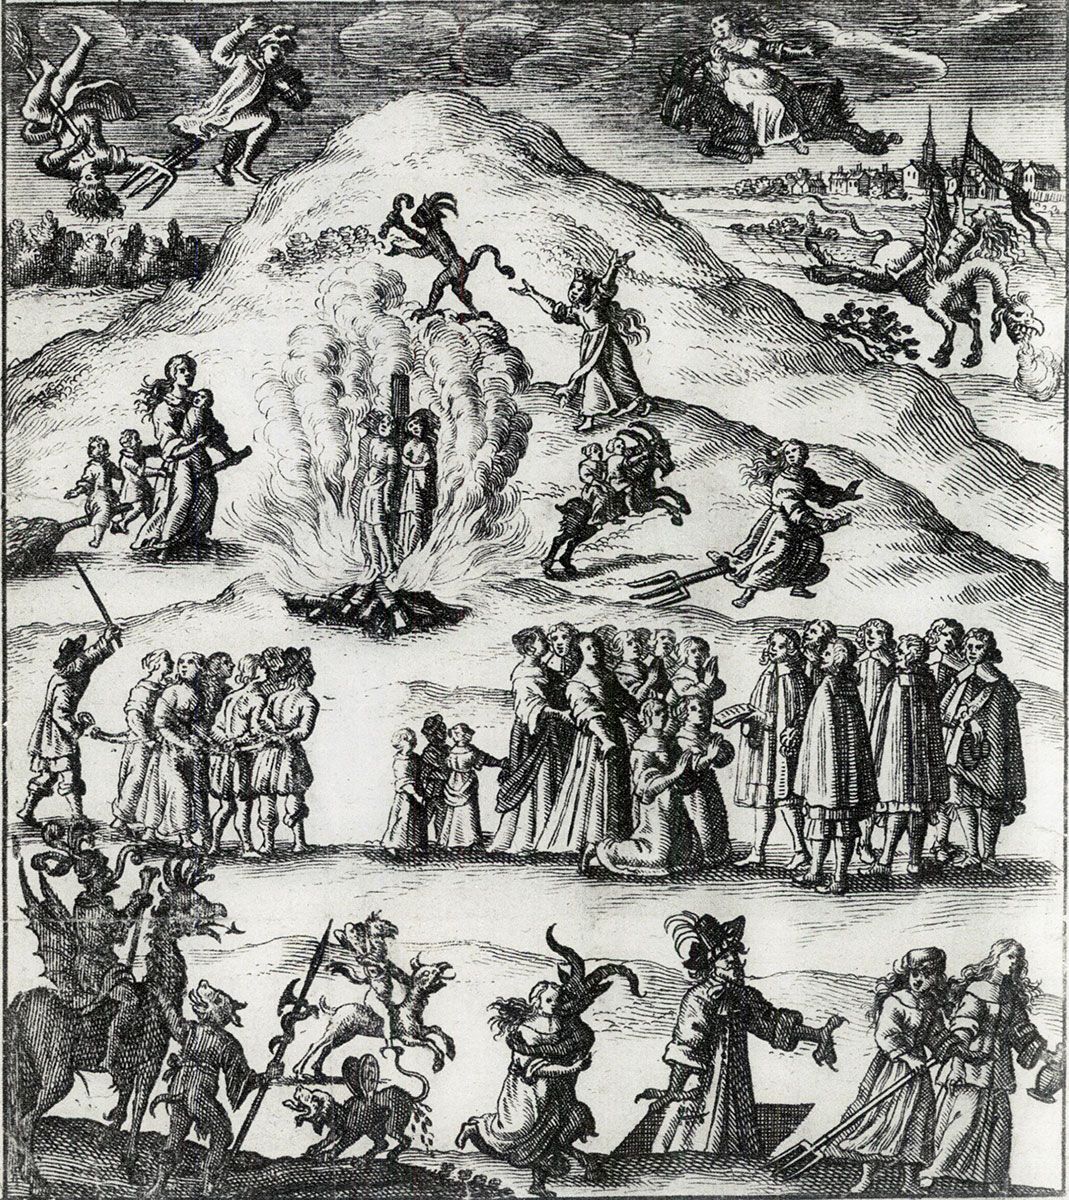 Ink illustration of a scene of chaos: two people burning at the stake, groups of women bound in handcuffs and ordered around by men, small devilish characters with horns, and women flying on pitchforks.